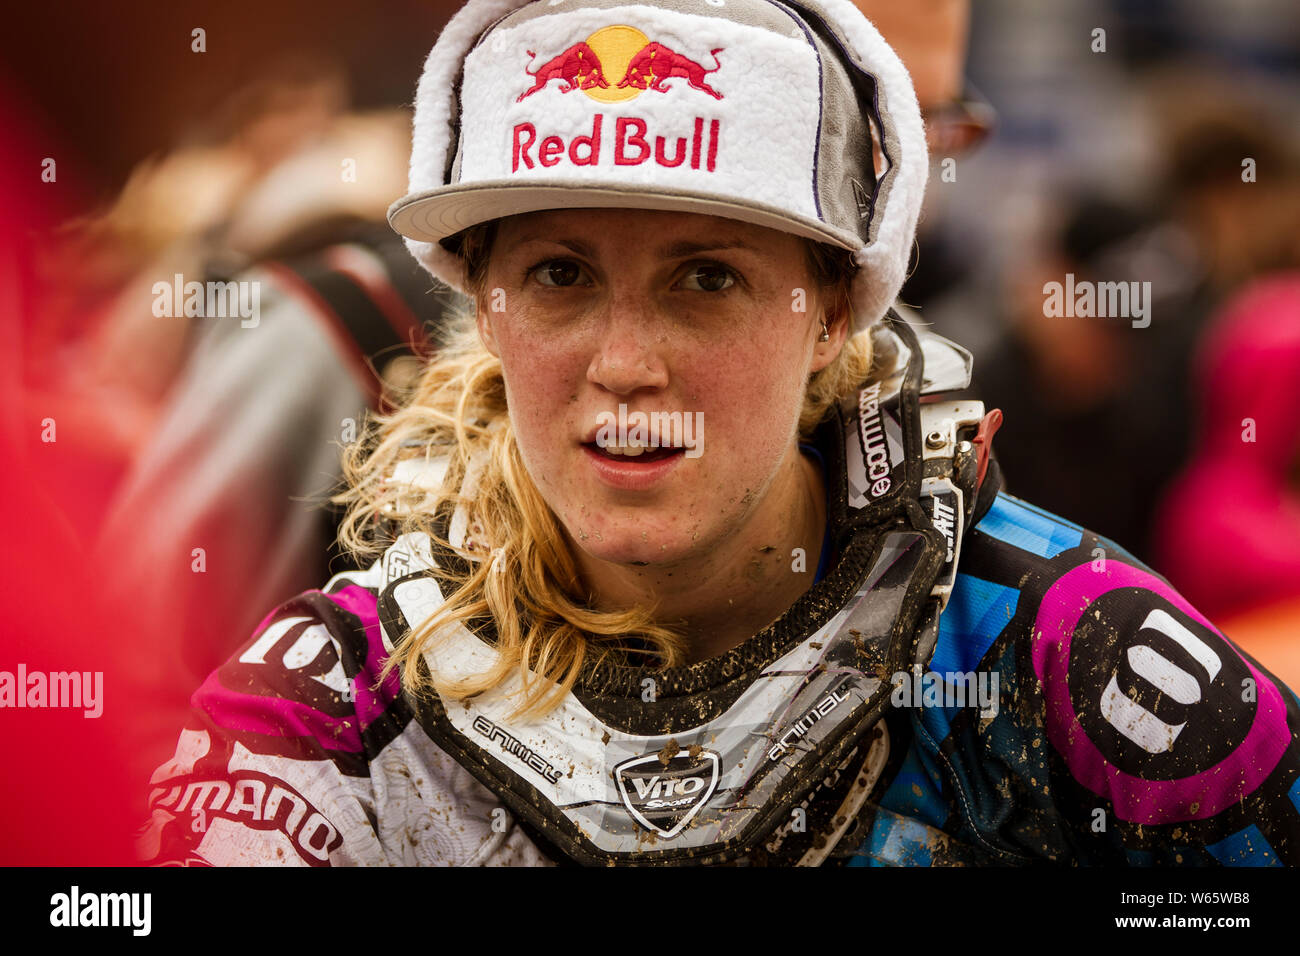 JUNE 12, 2011 - LEOGANG, AUSTRIA. Rachel Atherton (GBR) at the UCI Mountain Bike Downhill World Cup. Stock Photo